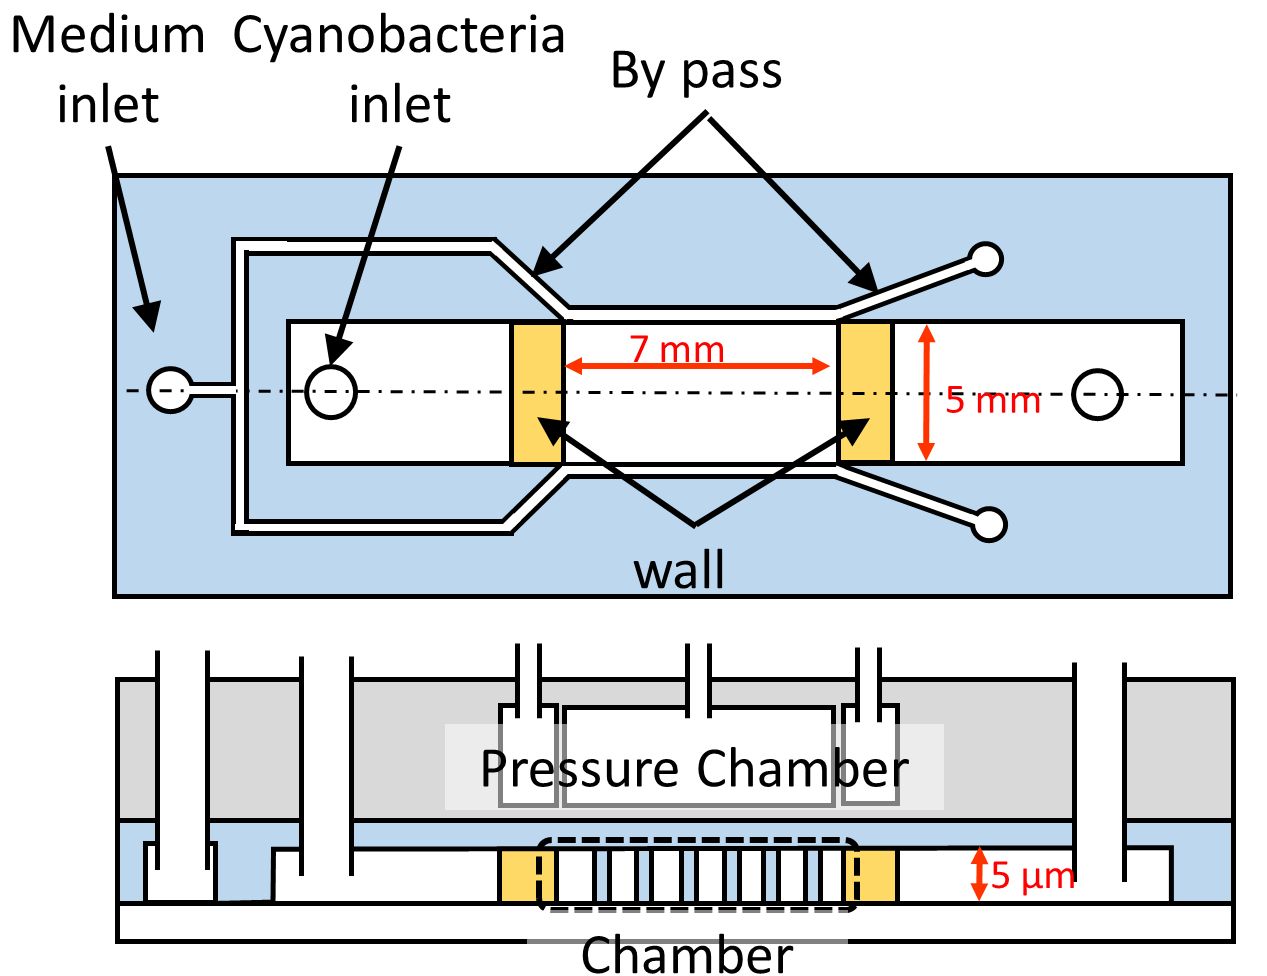 Microfluidic device for the suppression of cell division of cyanobacteria